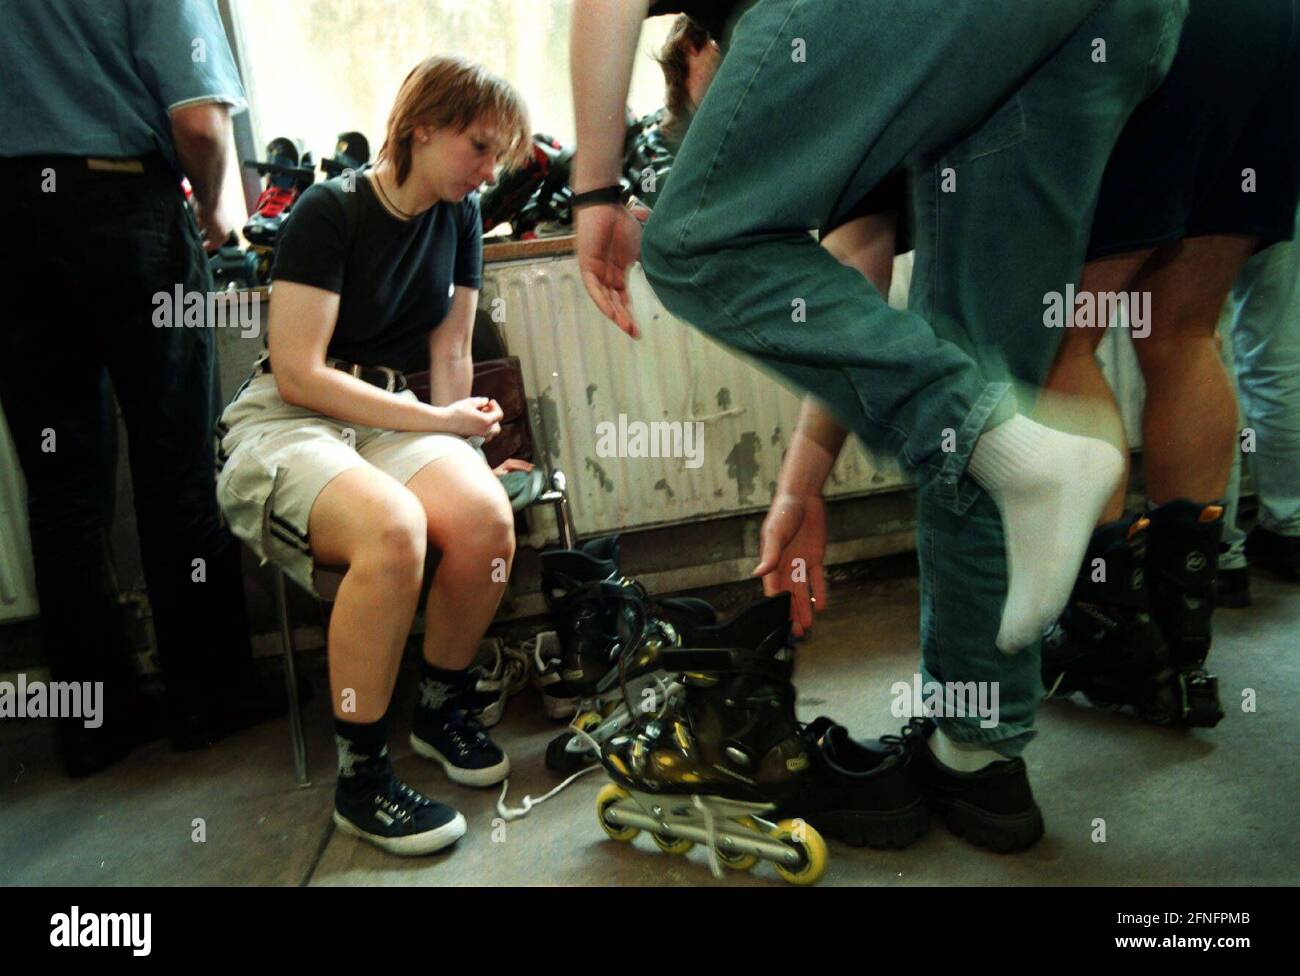 Germany, Berlin, 25.07.1998, auction at Stiftung Warentest, tested devices are auctioned, trying on of inline scates, . [automated translation] Stock Photo